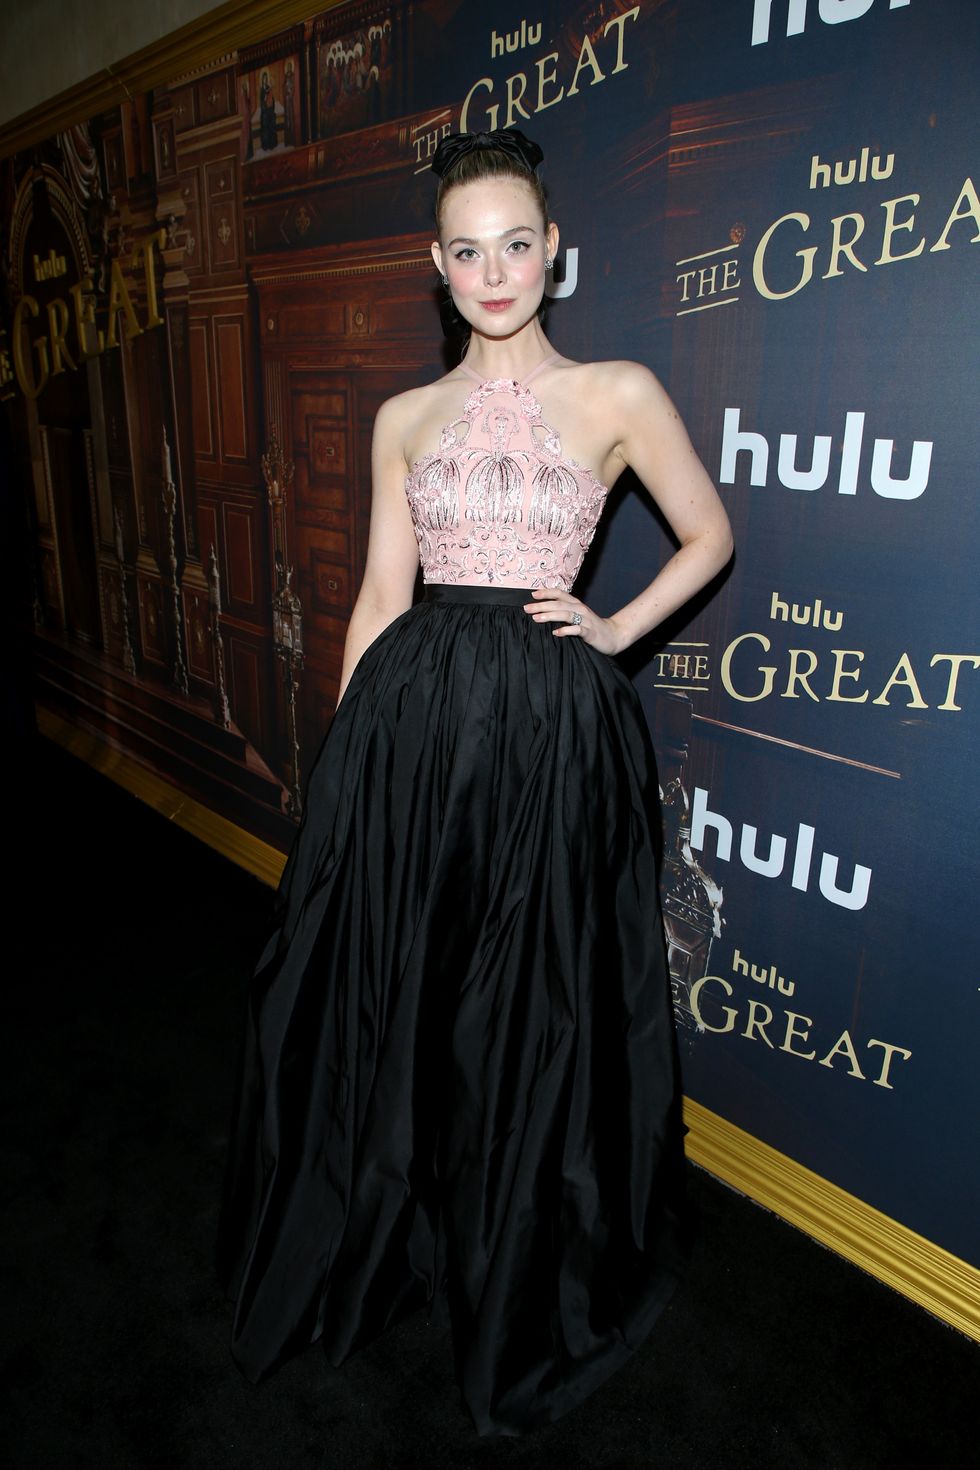 los angeles premiere of hulu's "the great" red carpet